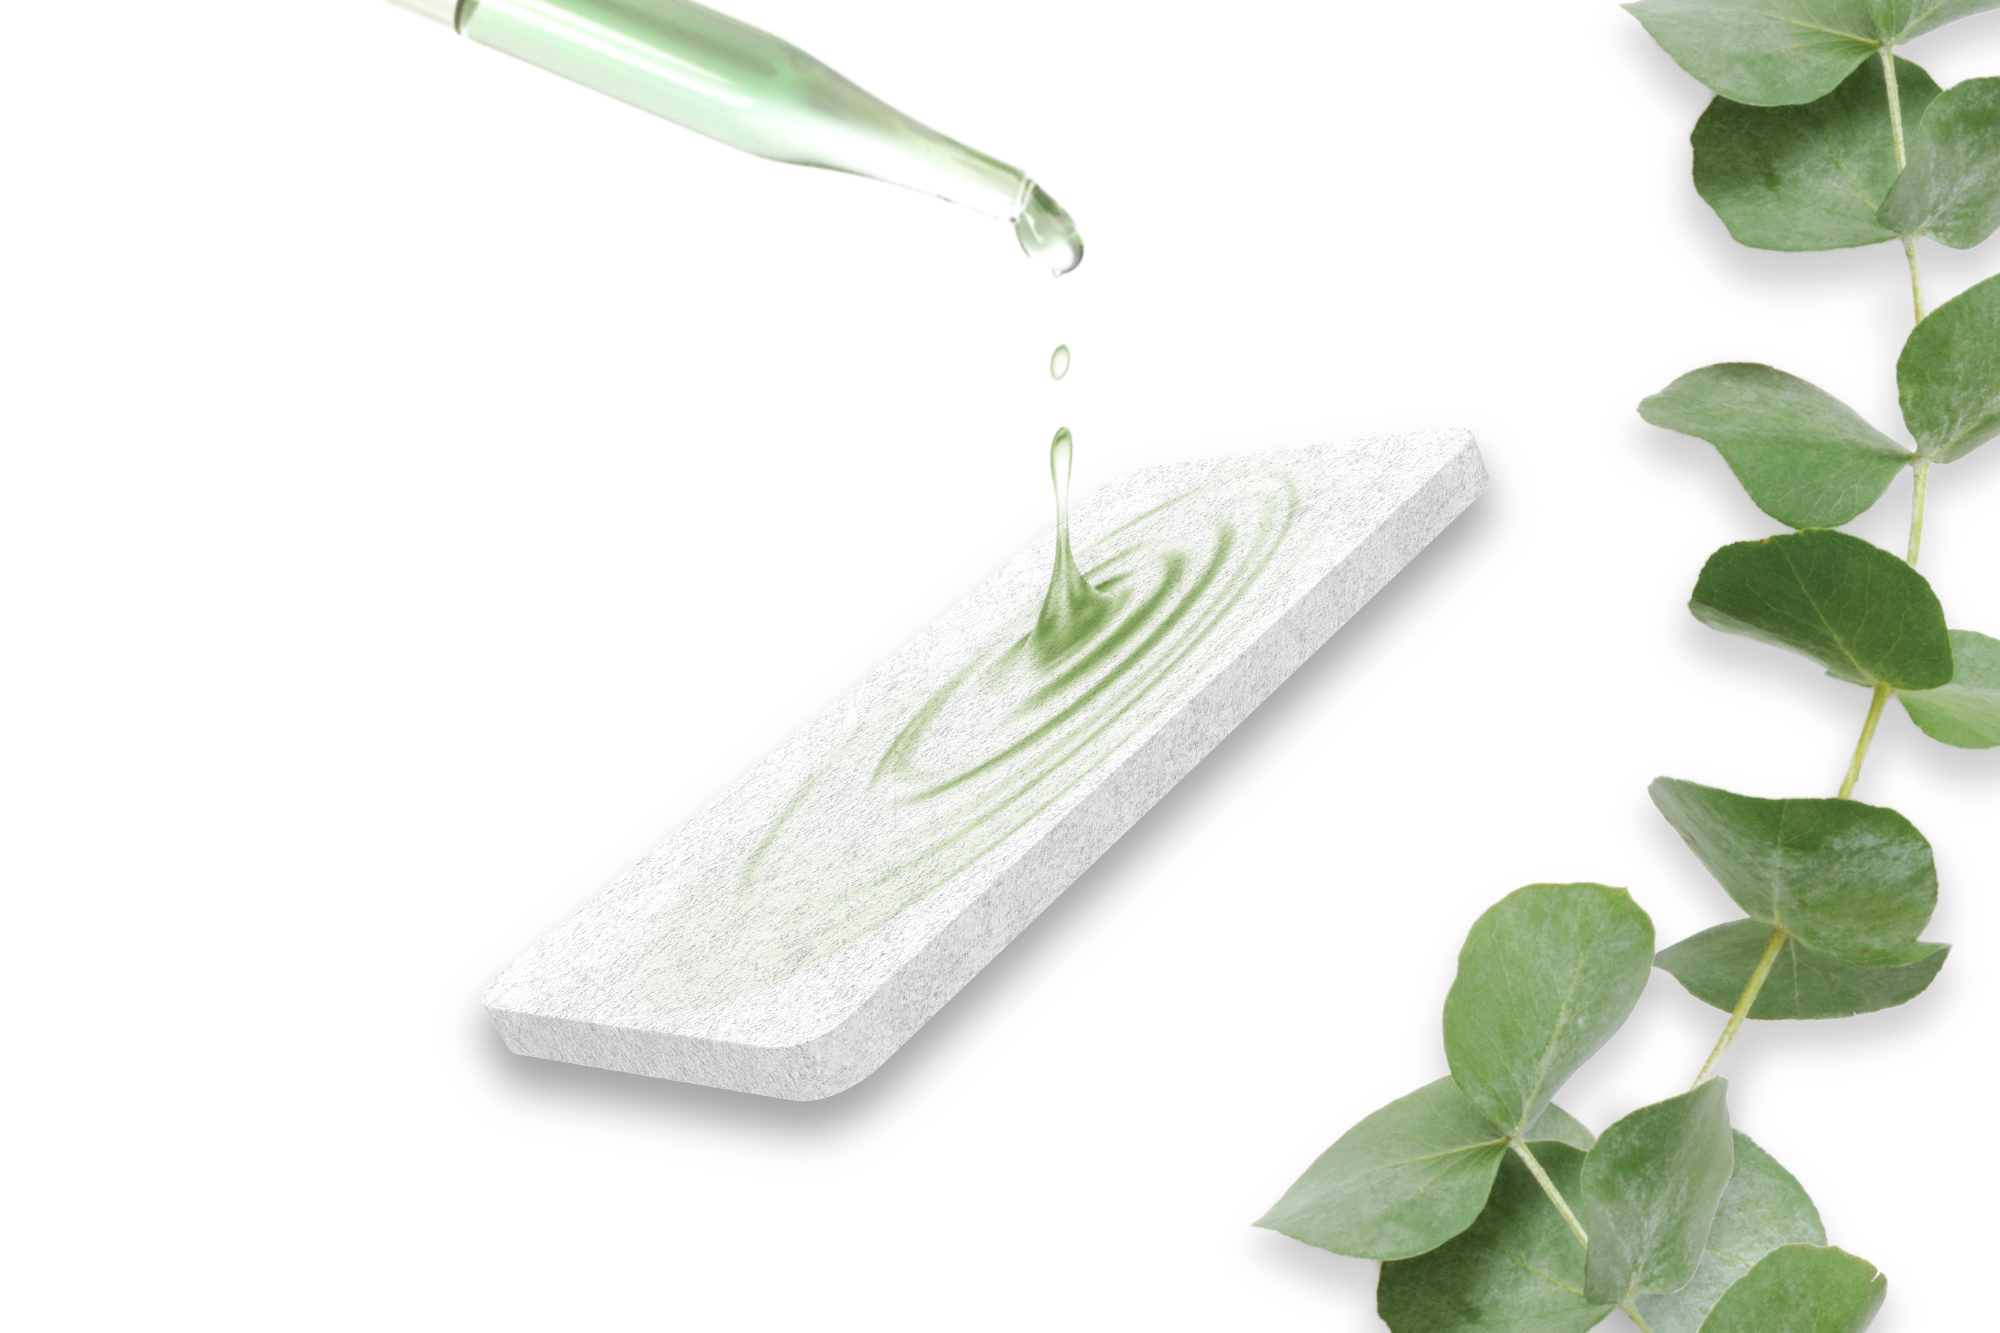 Eucalyptus pre-soaked aroma pad with green liquid drops and eucalyptus leaves